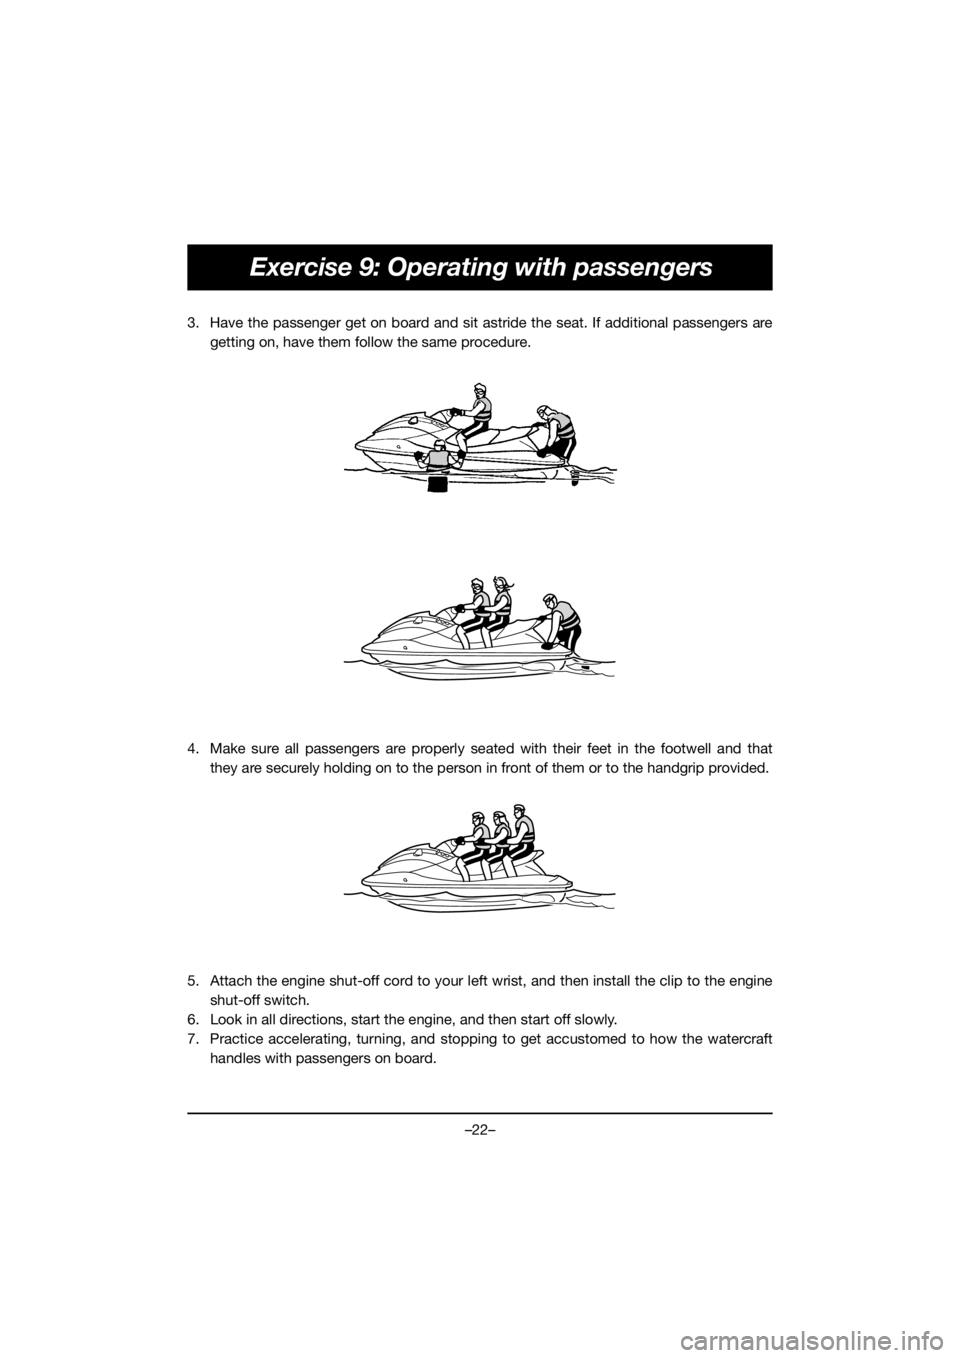 YAMAHA FJR1300 2020  Manuale duso (in Italian) –22–
Exercise 9: Operating with passengers
3. Have the passenger get on board and sit astride the seat. If additional passengers are
getting on, have them follow the same procedure. 
4. Make sure 